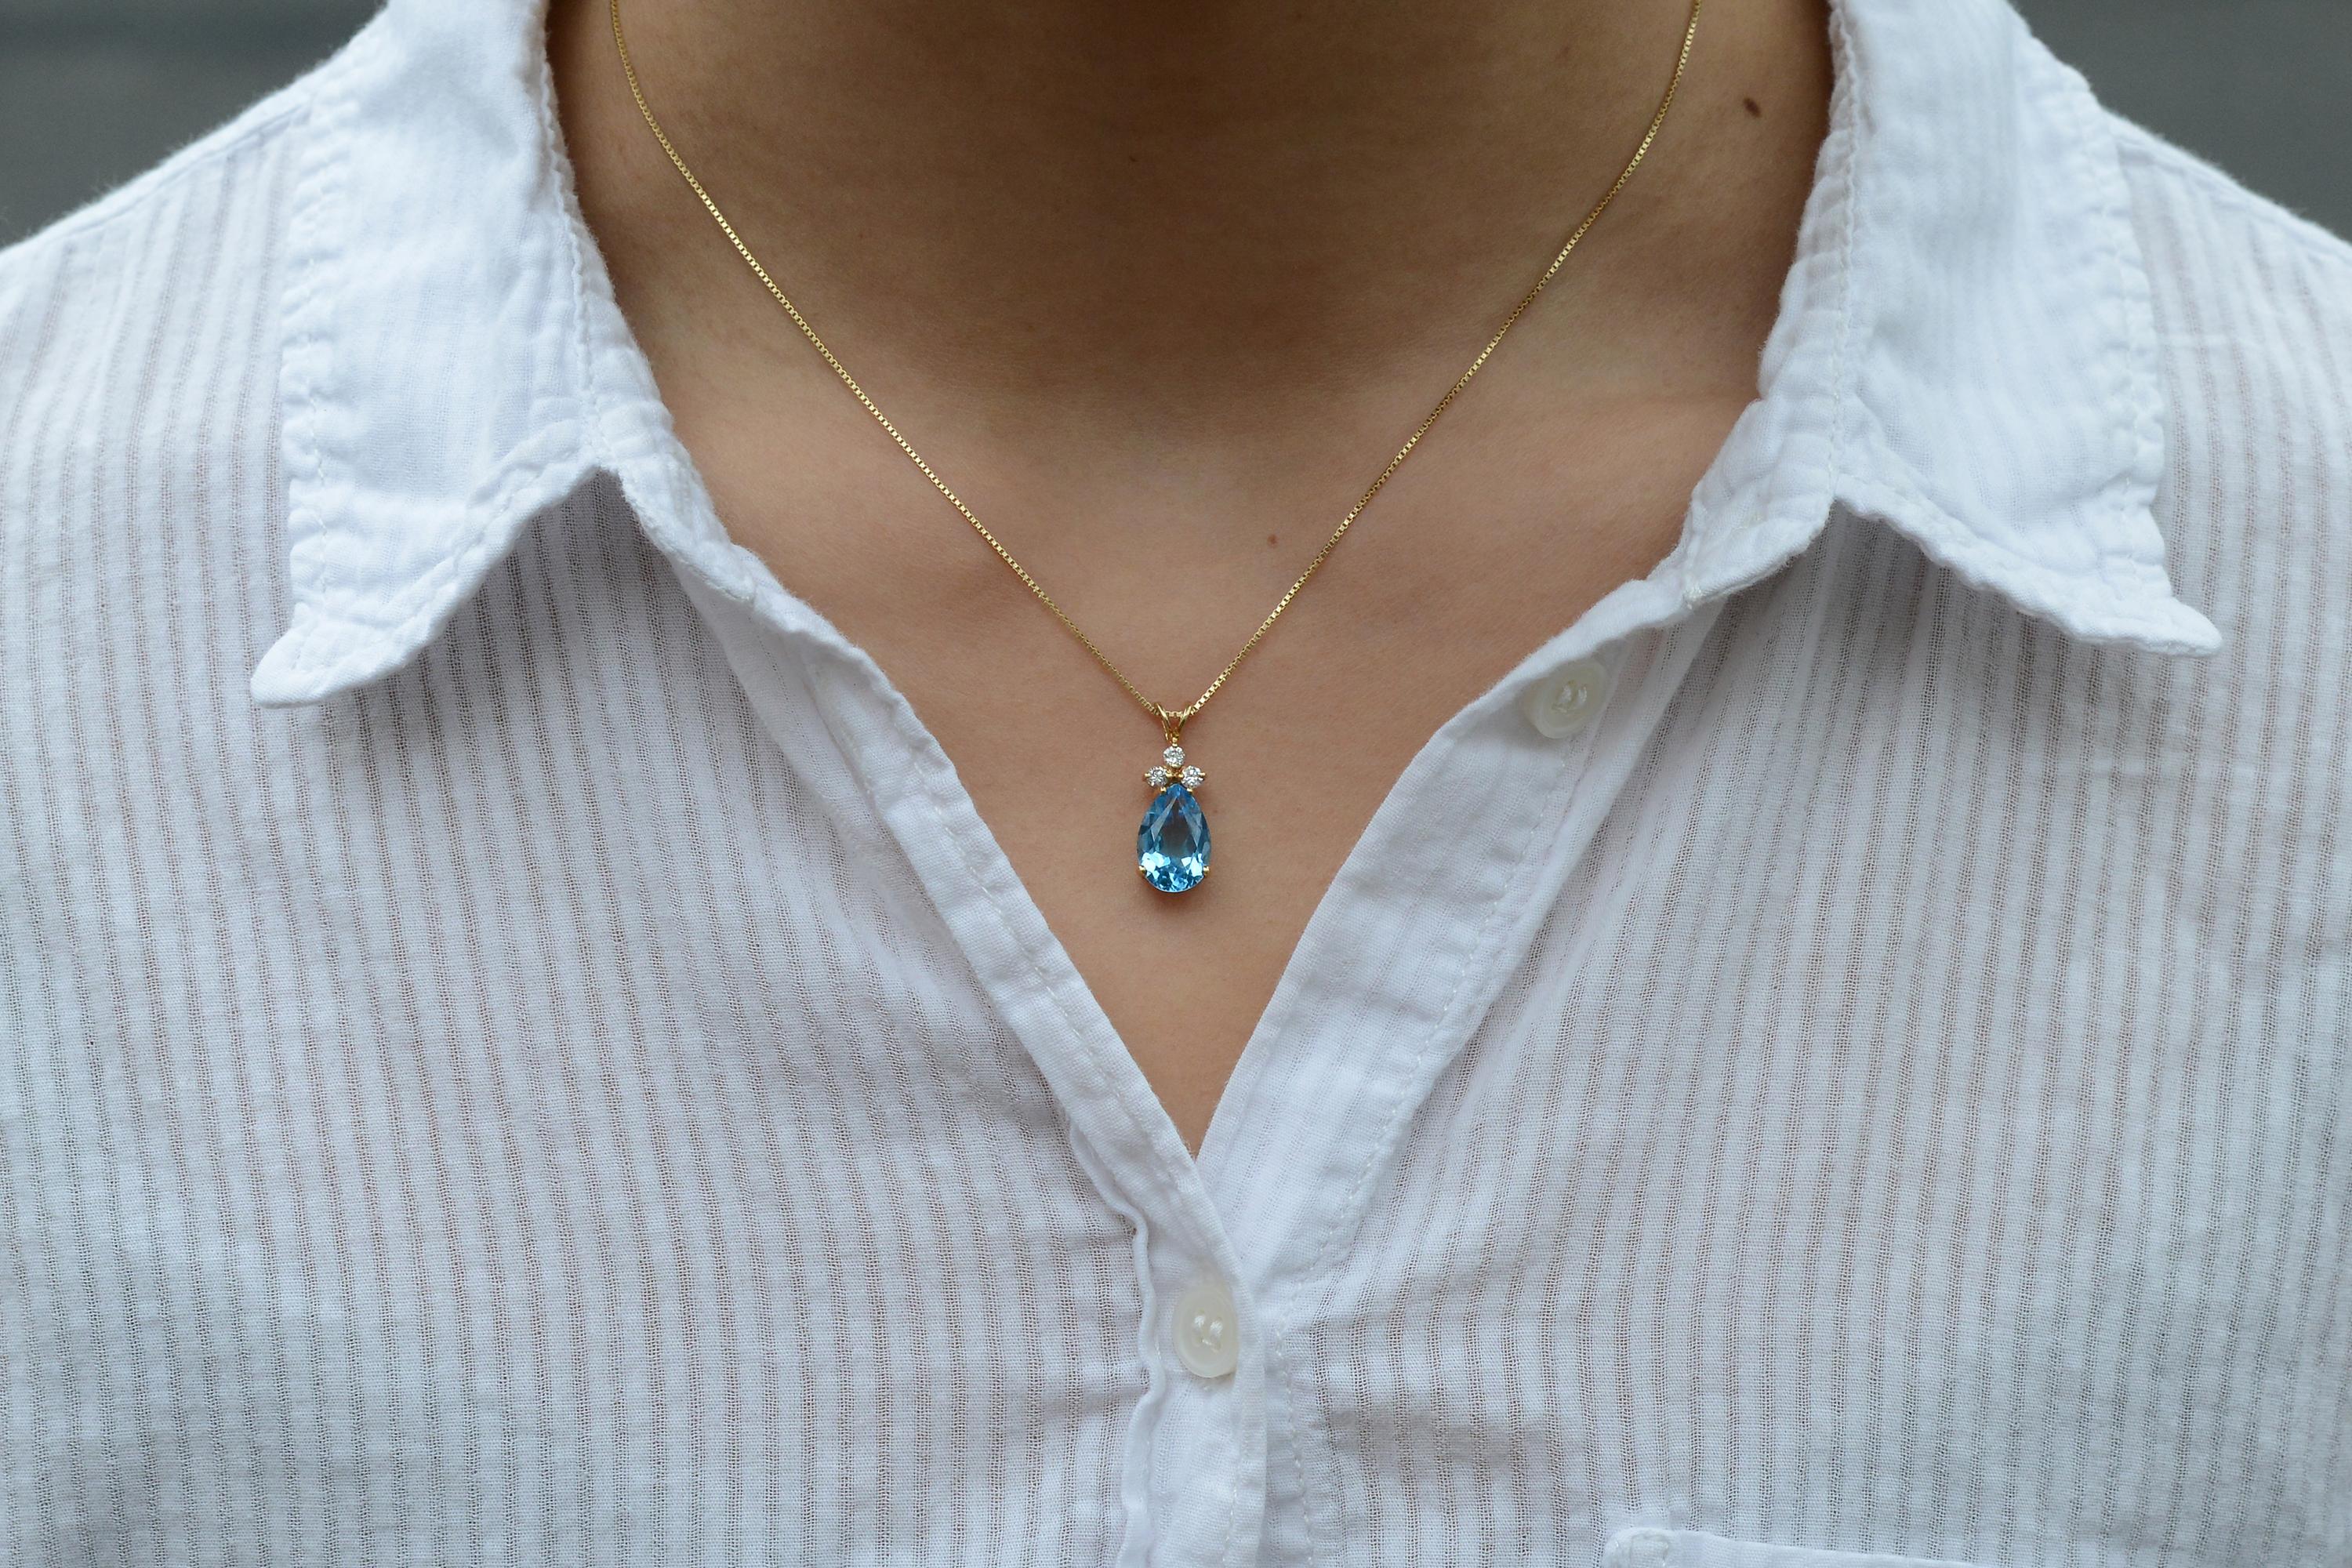 An affordable vintage luxury, this elegant estate necklace features an exquisite 4-carat blue topaz cut in a classic teardrop shape. The dainty chain and sparkling accent diamonds add perfect addition to your ensemble. You'll love the sought-after